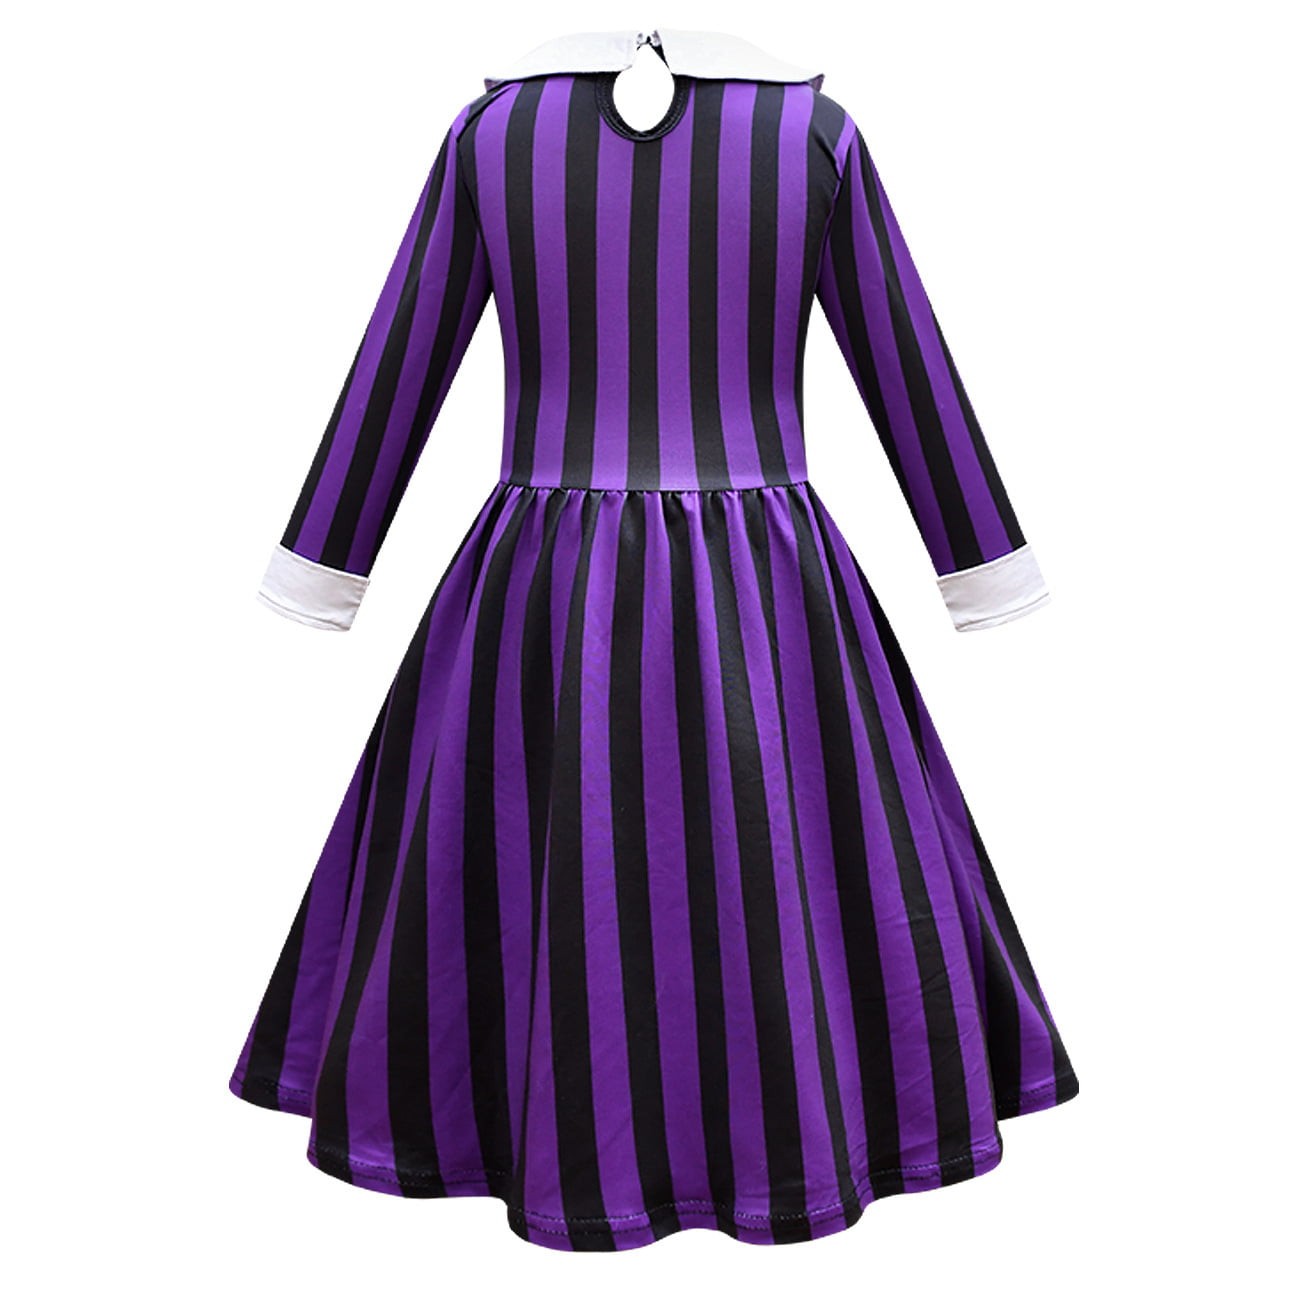 KANY Halloween Family Cosplay Costumes Dance Dress Wednesday Addams ...